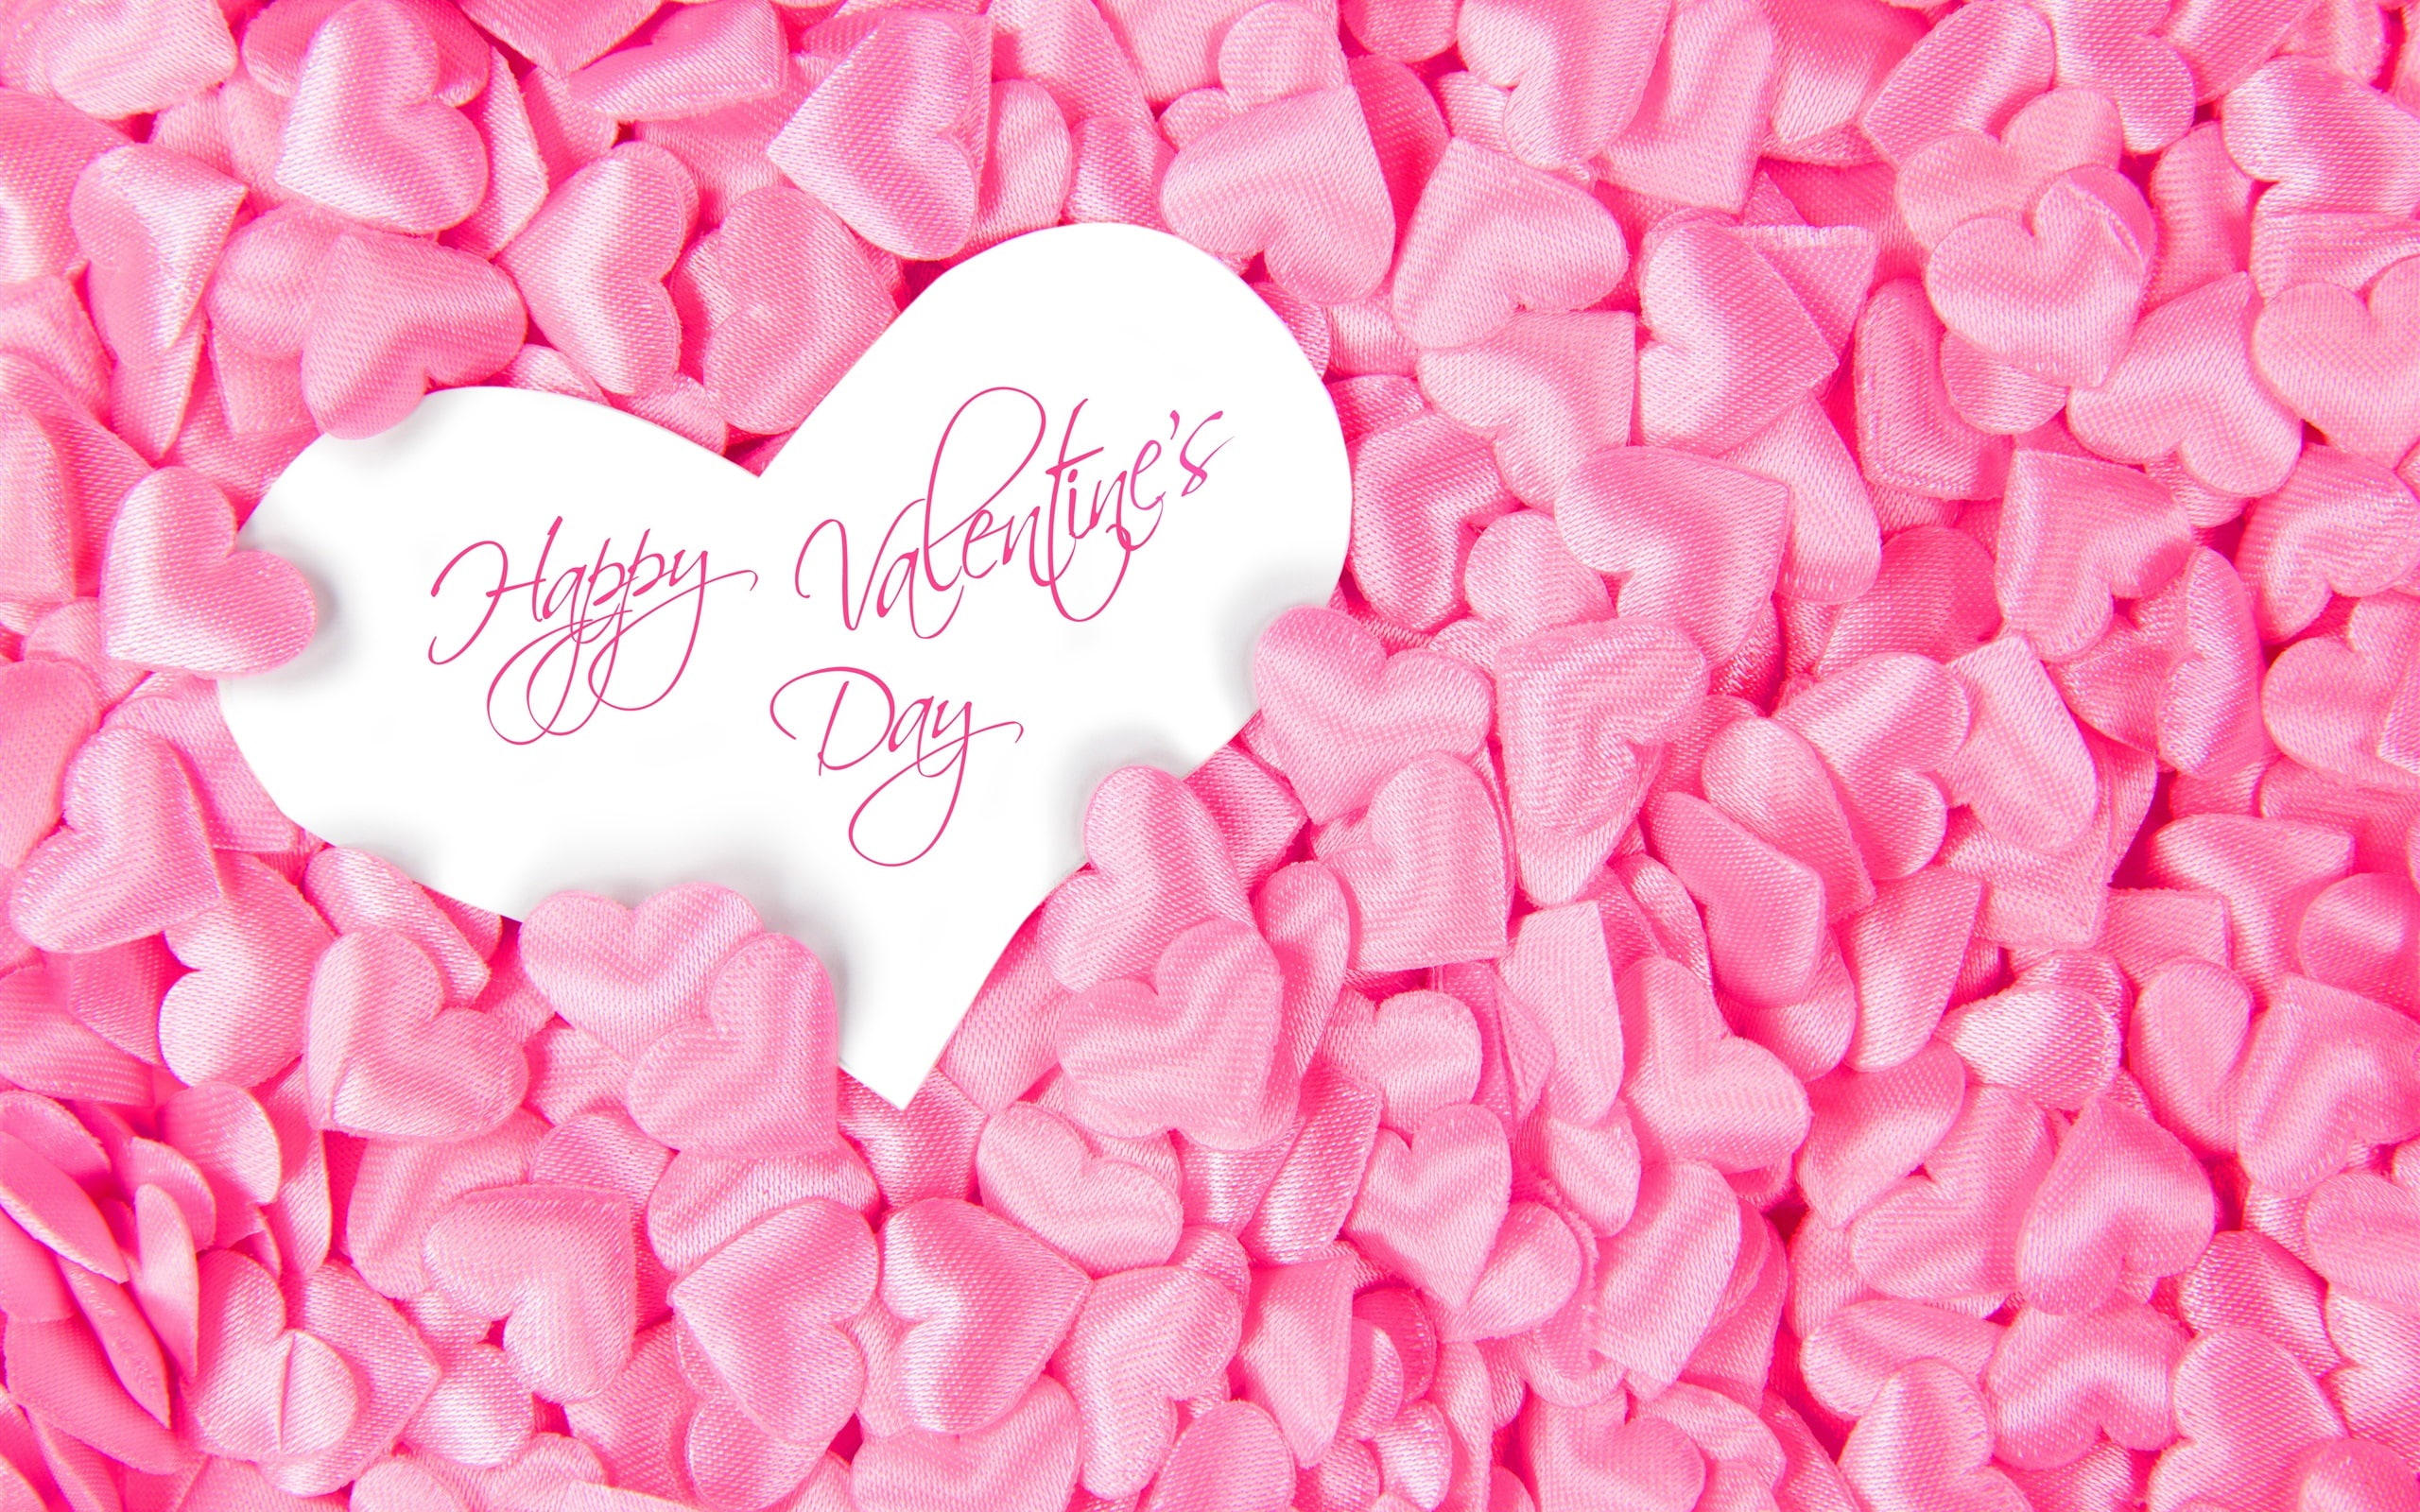 Wallpaper Happy Valentine's Day, many pink love hearts • Wallpaper For You HD Wallpaper For Desktop & Mobile